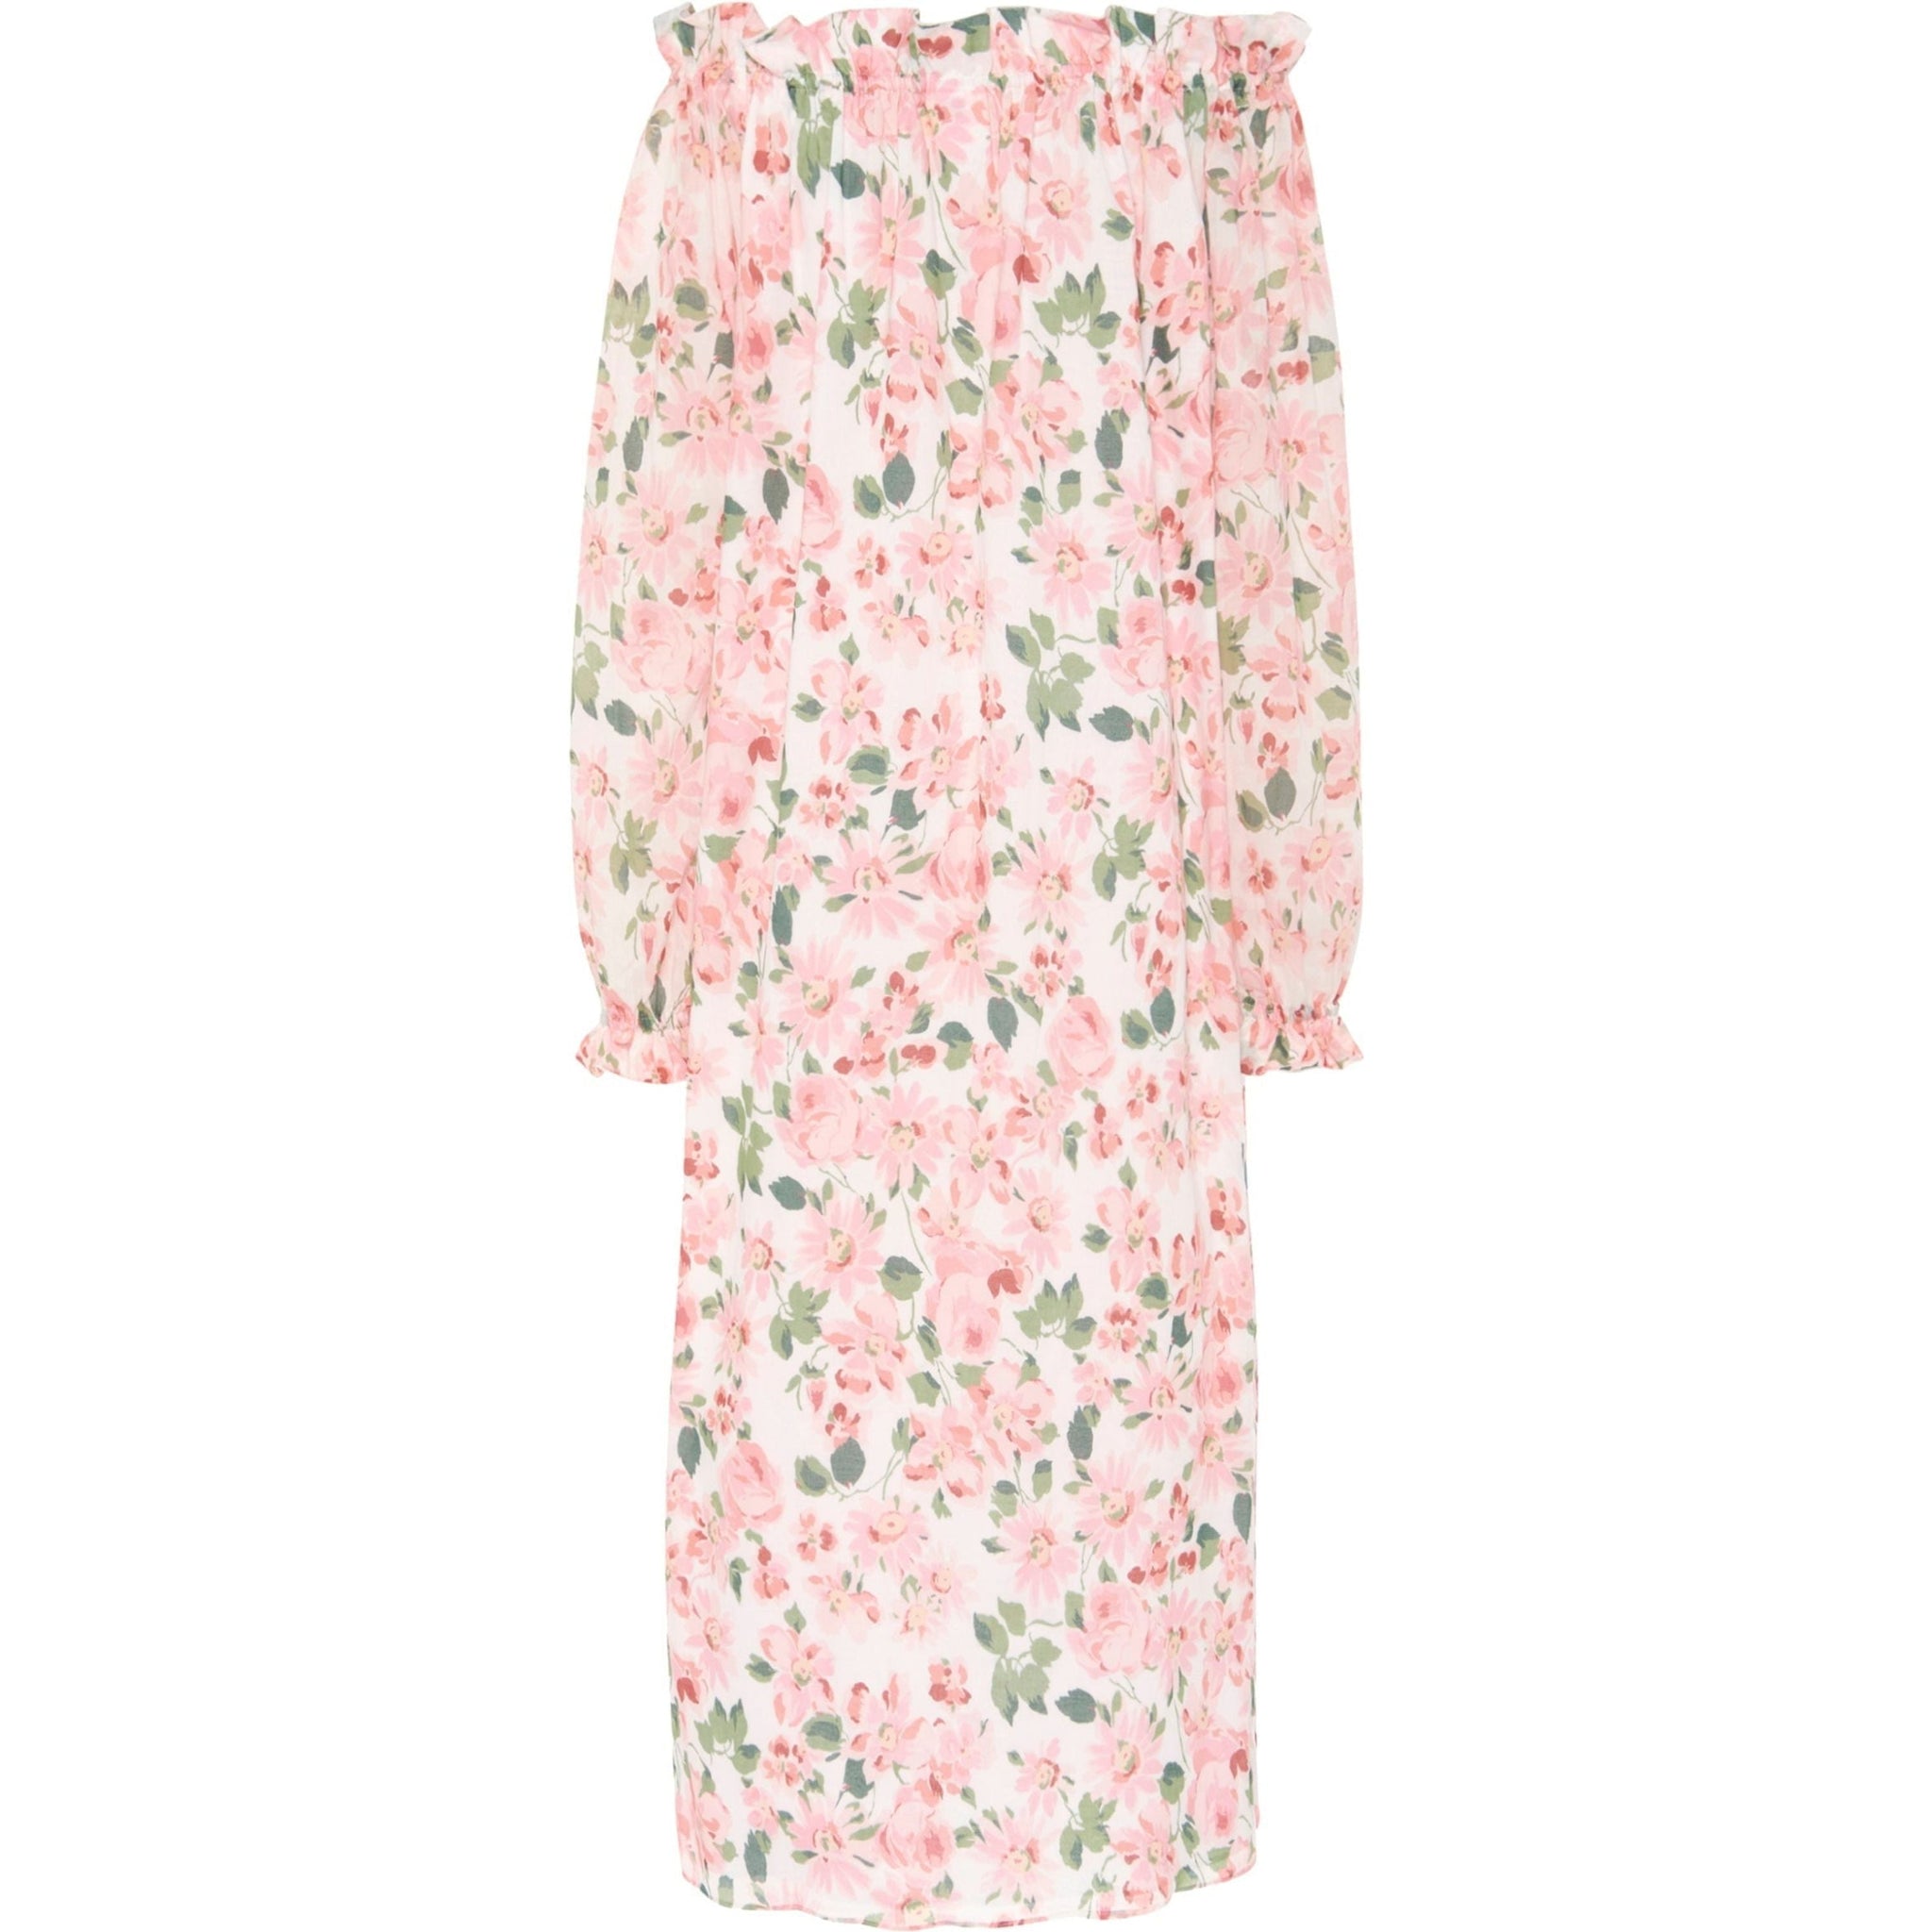 Grace Dress in Pink Floral Cotton Voile by Casey Marks